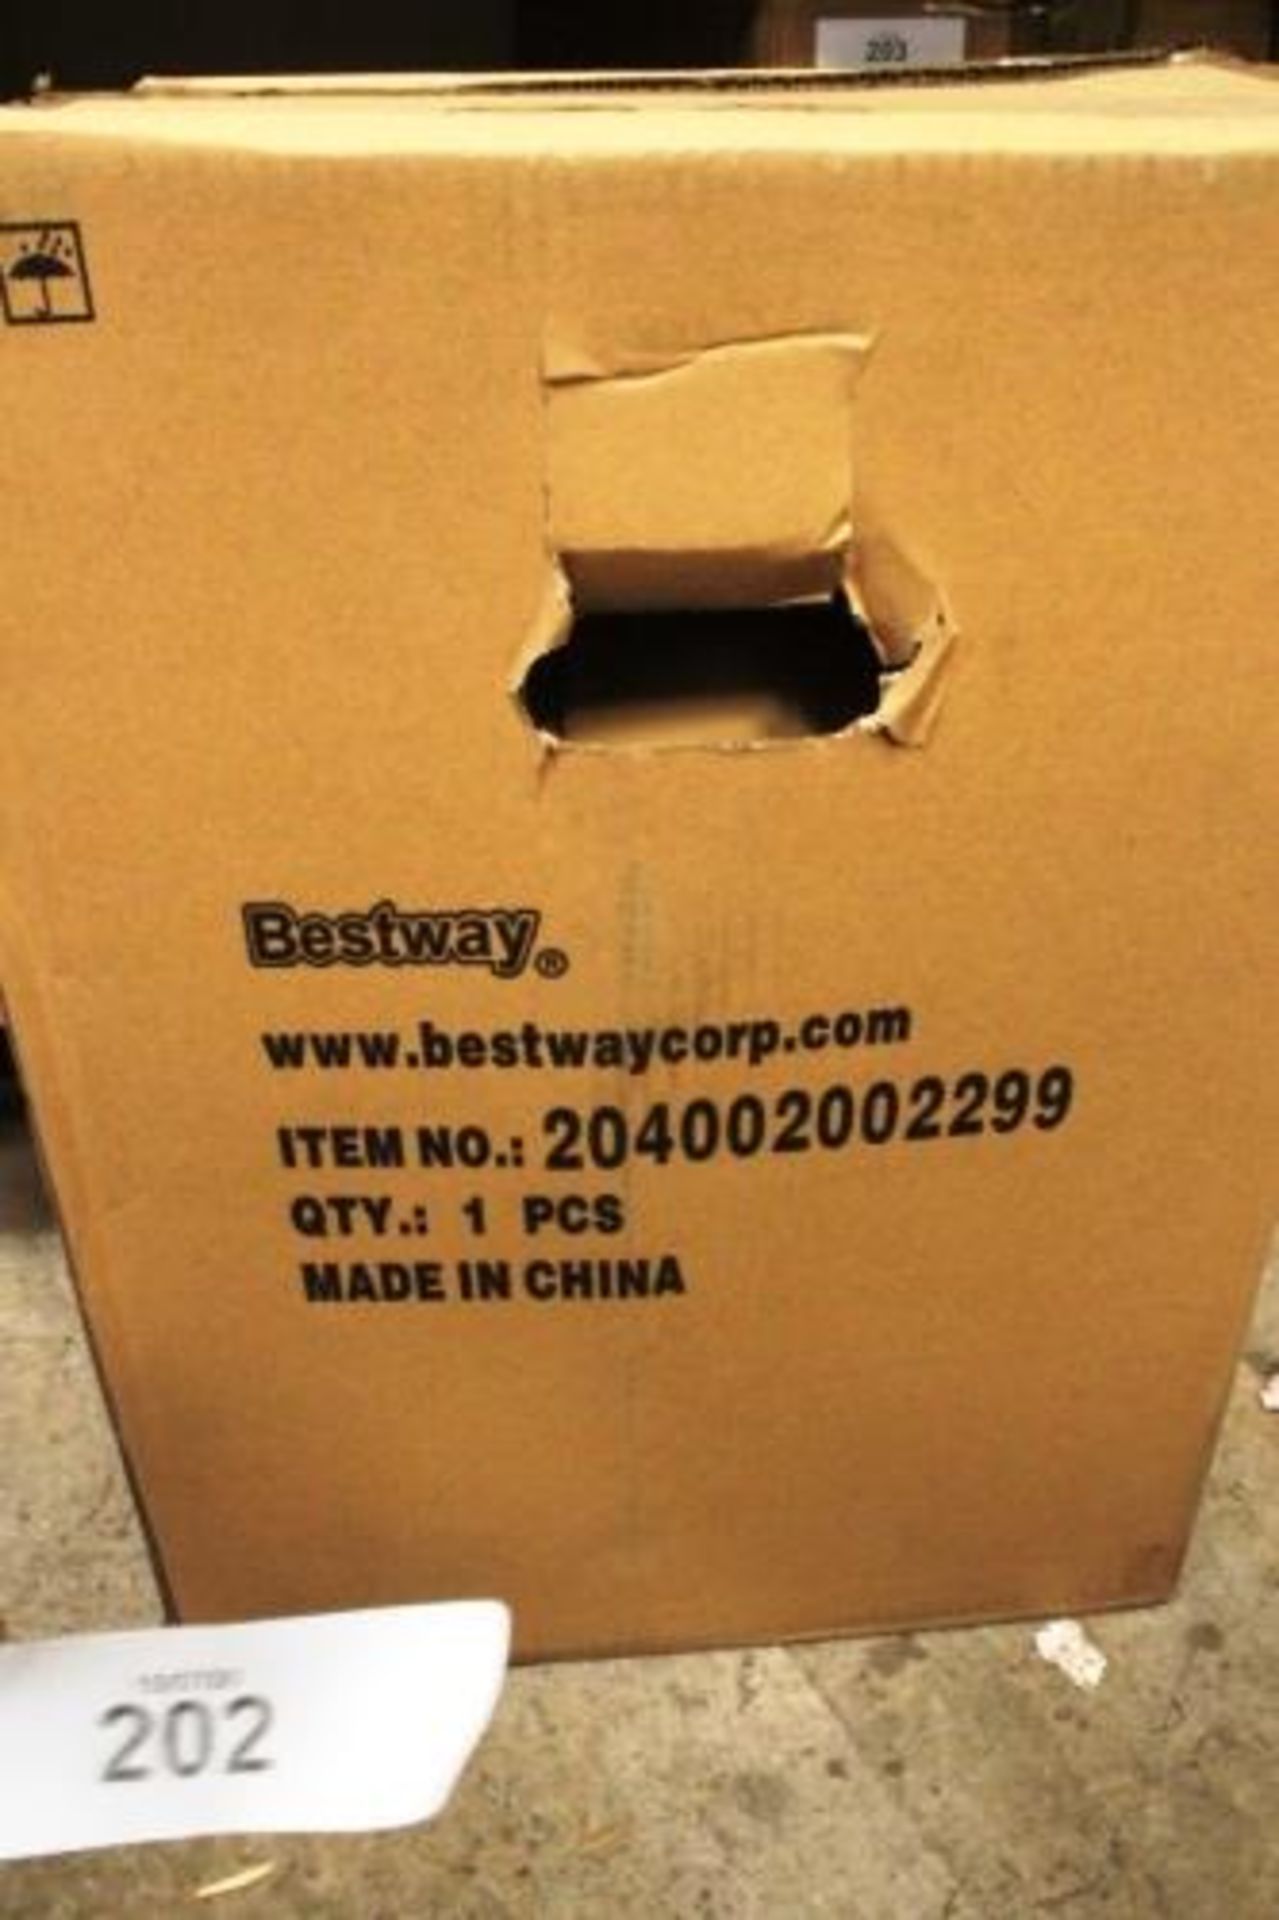 1 x Bestway Jacuzzi pump, model 204002002299 - New in box, box open, unchecked (GS16) - Image 2 of 2